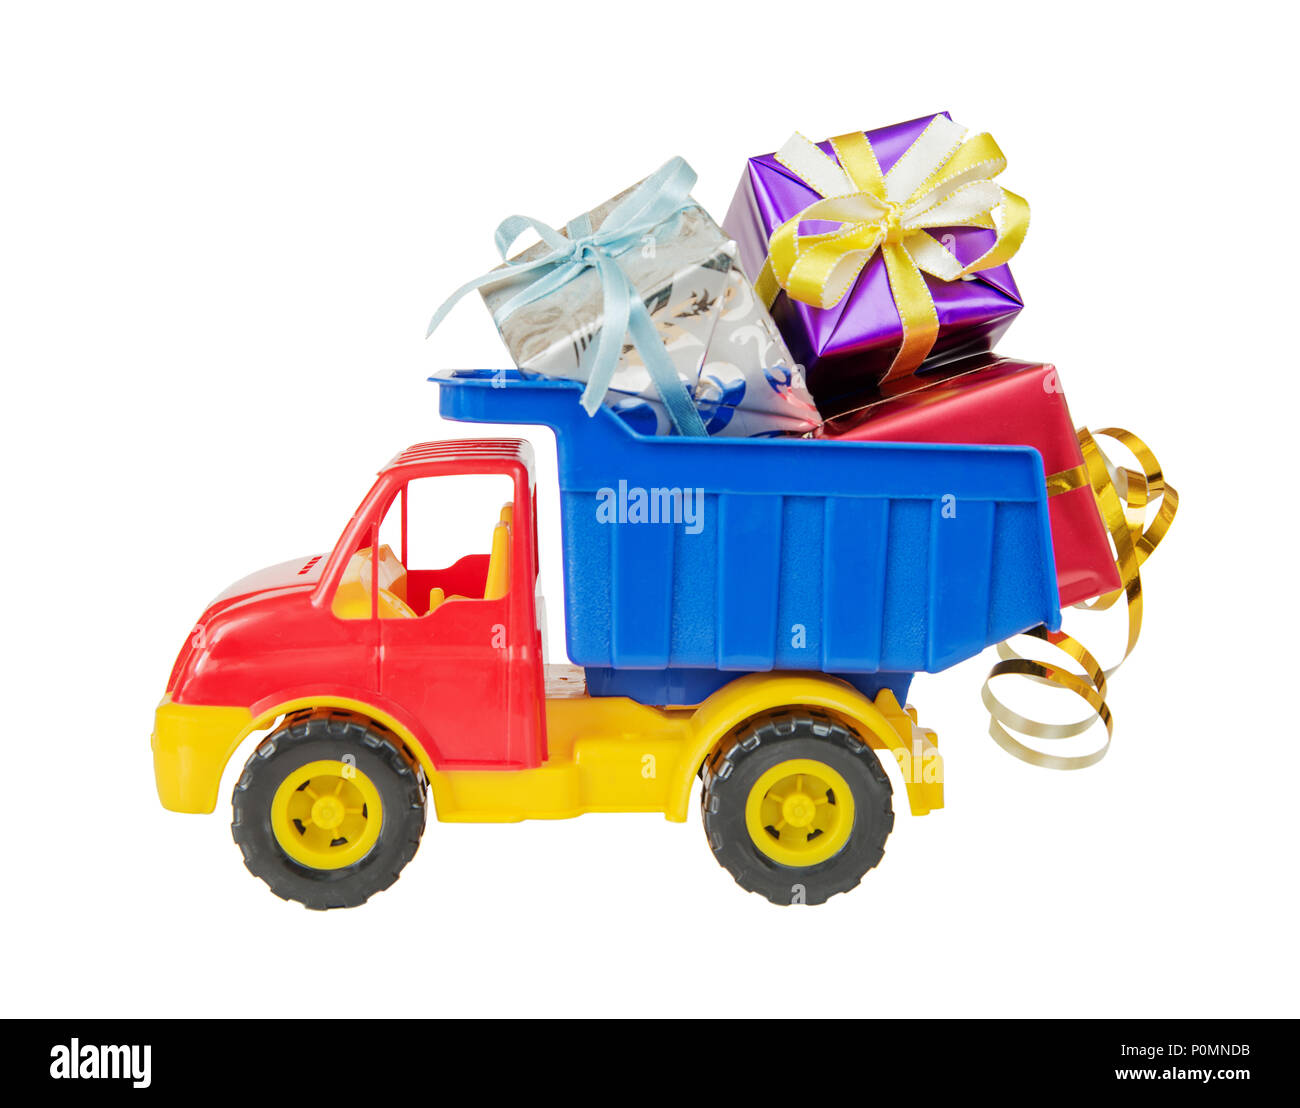 Multicolored plastic toy lorry delivers many gift boxes tied with decorative ribbons in body,  isolated on white background Stock Photo